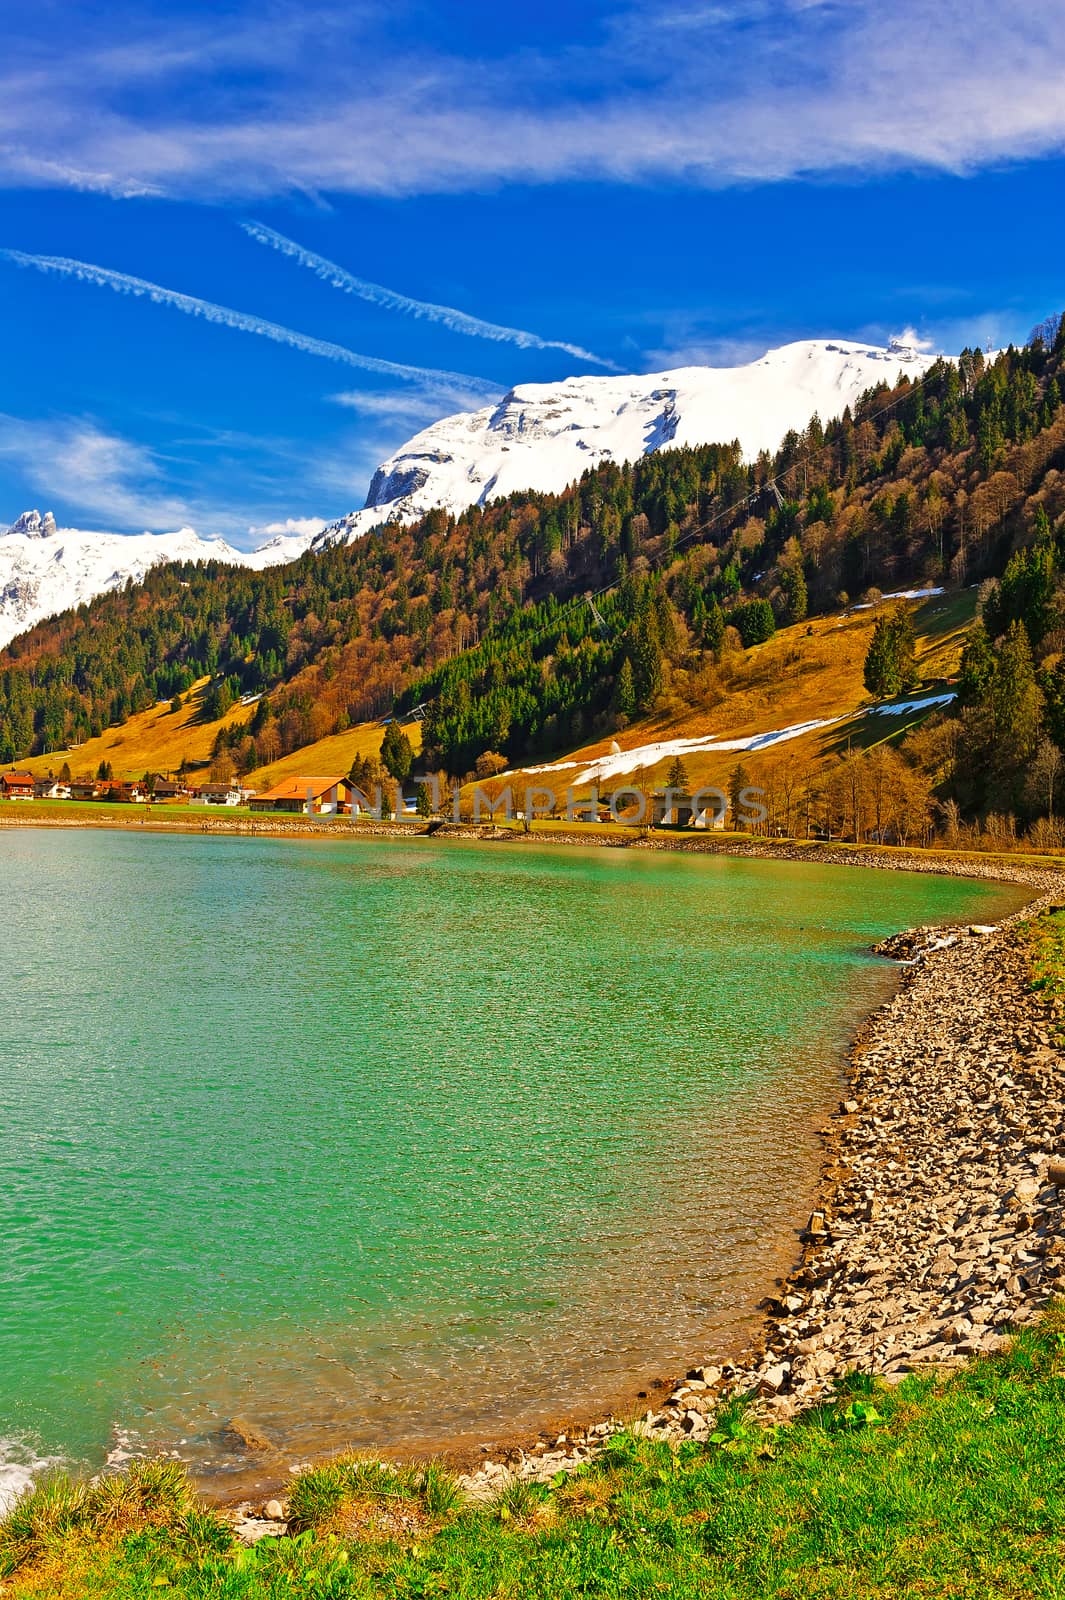 Mountain Lake on the Background of Snow-capped Alps in Switzerland